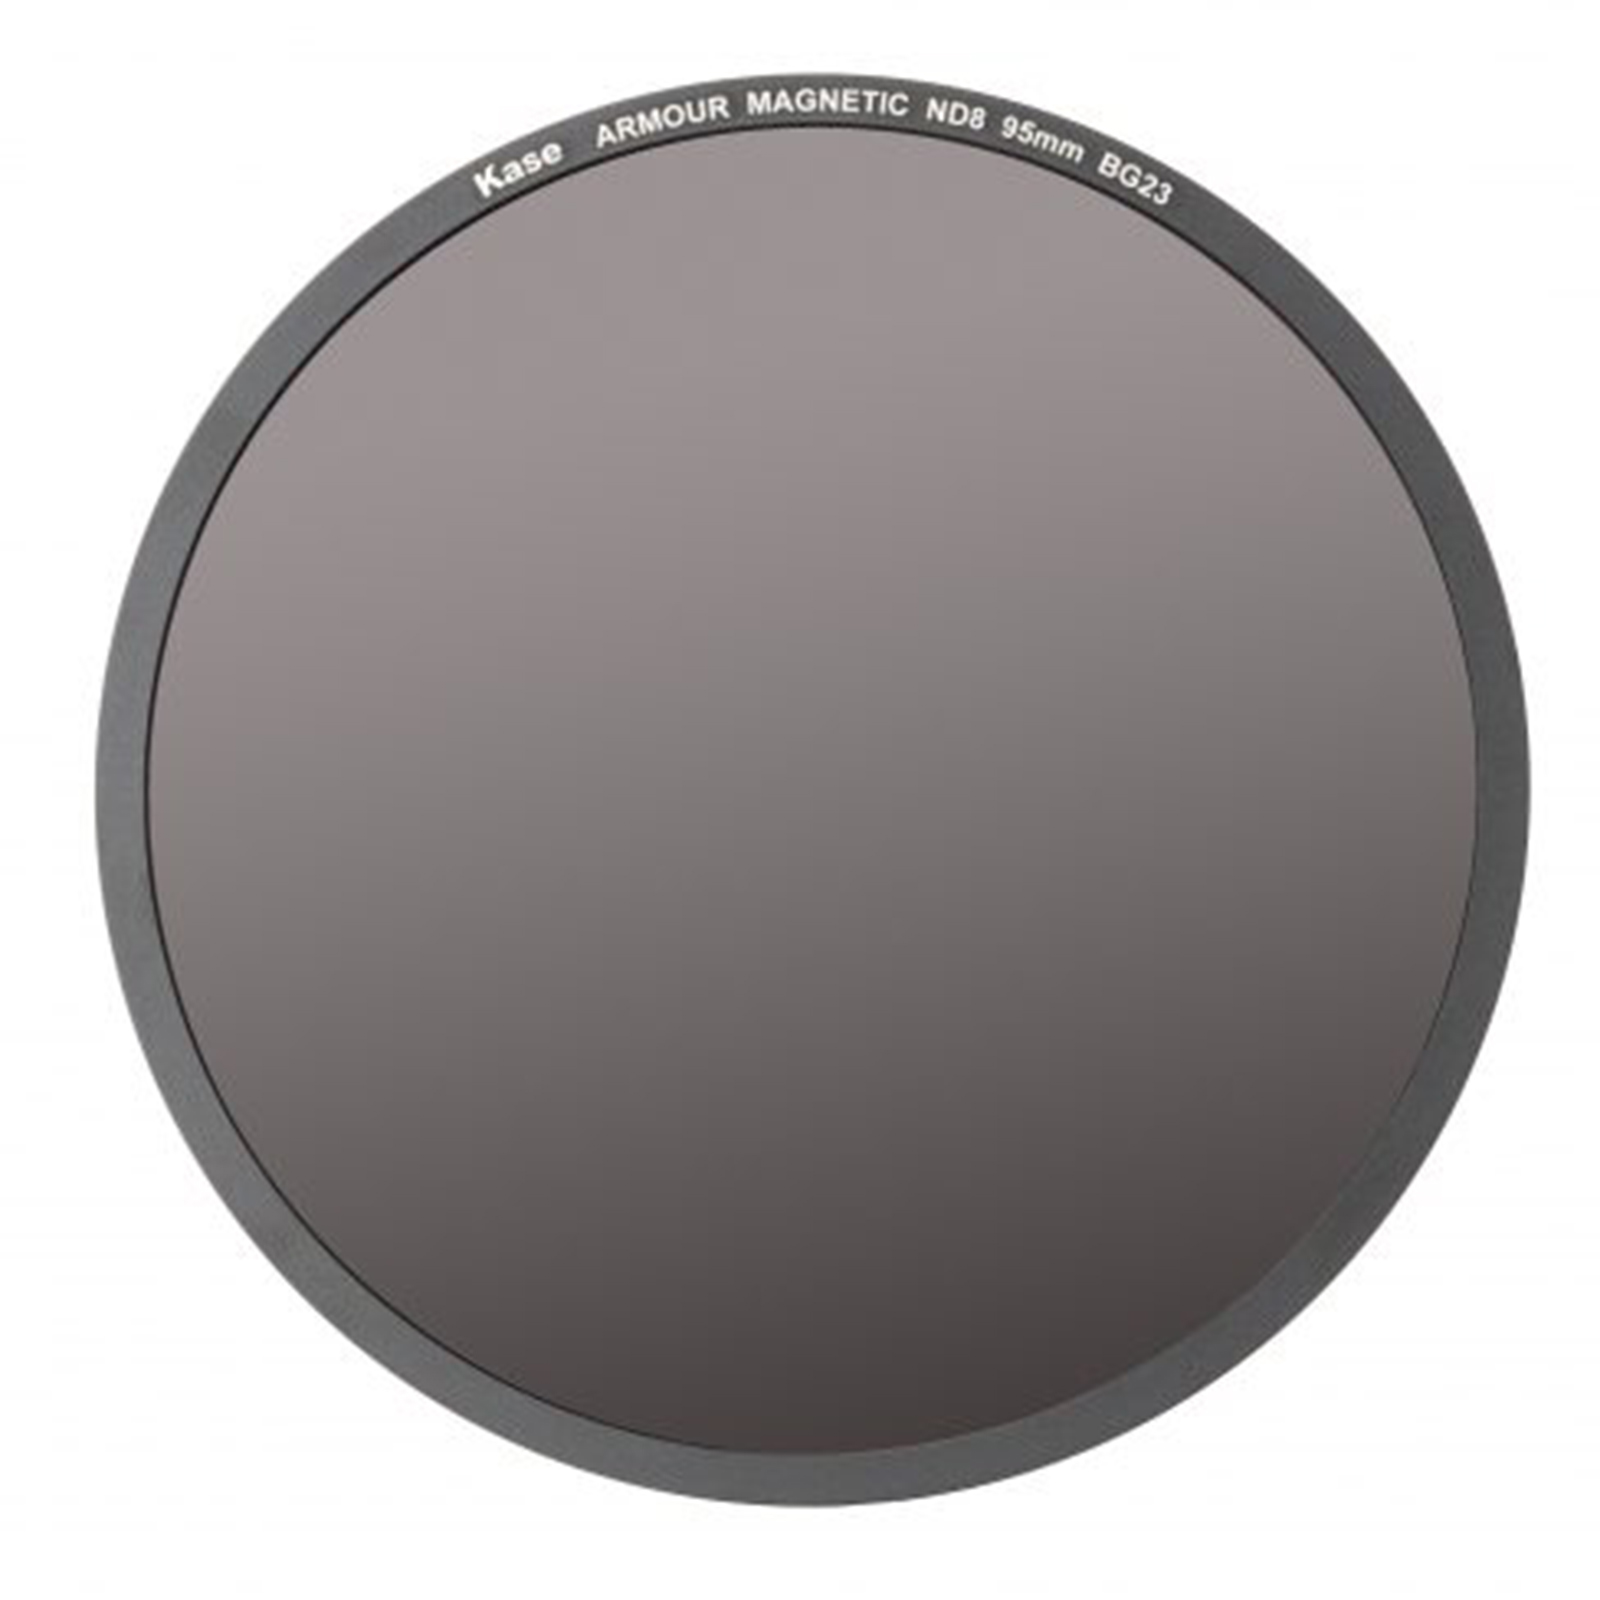 Image of Kase 95mm Armour Magnetic Circular Filter ND8